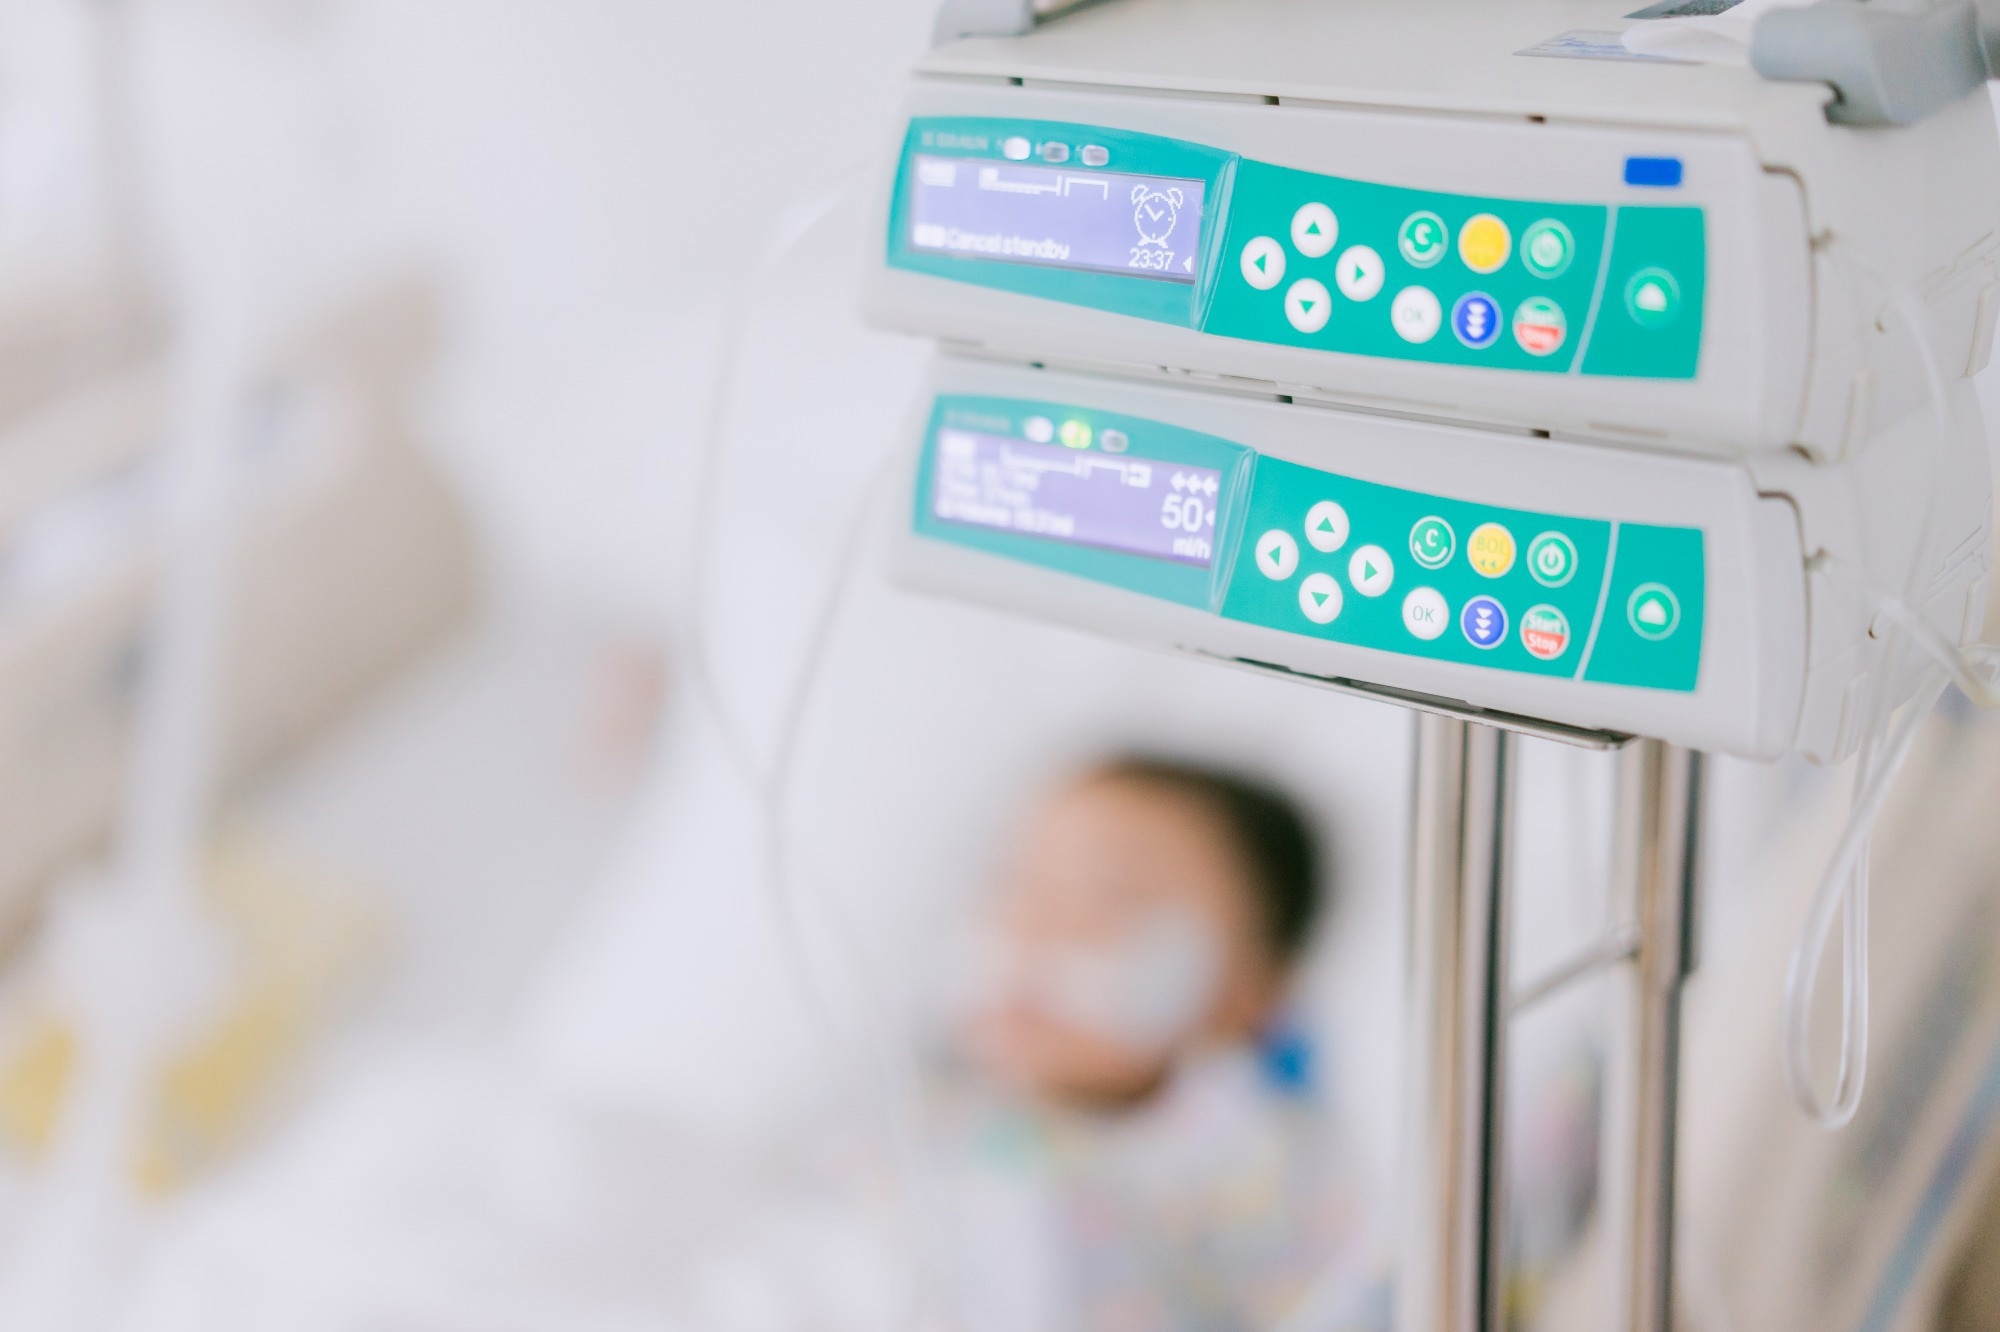 Study: Complications, Adverse Drug Events, High Costs, and Disparities in Multisystem Inflammatory Syndrome in Children vs COVID-19. Image Credit: MIA Studio / Shutterstock